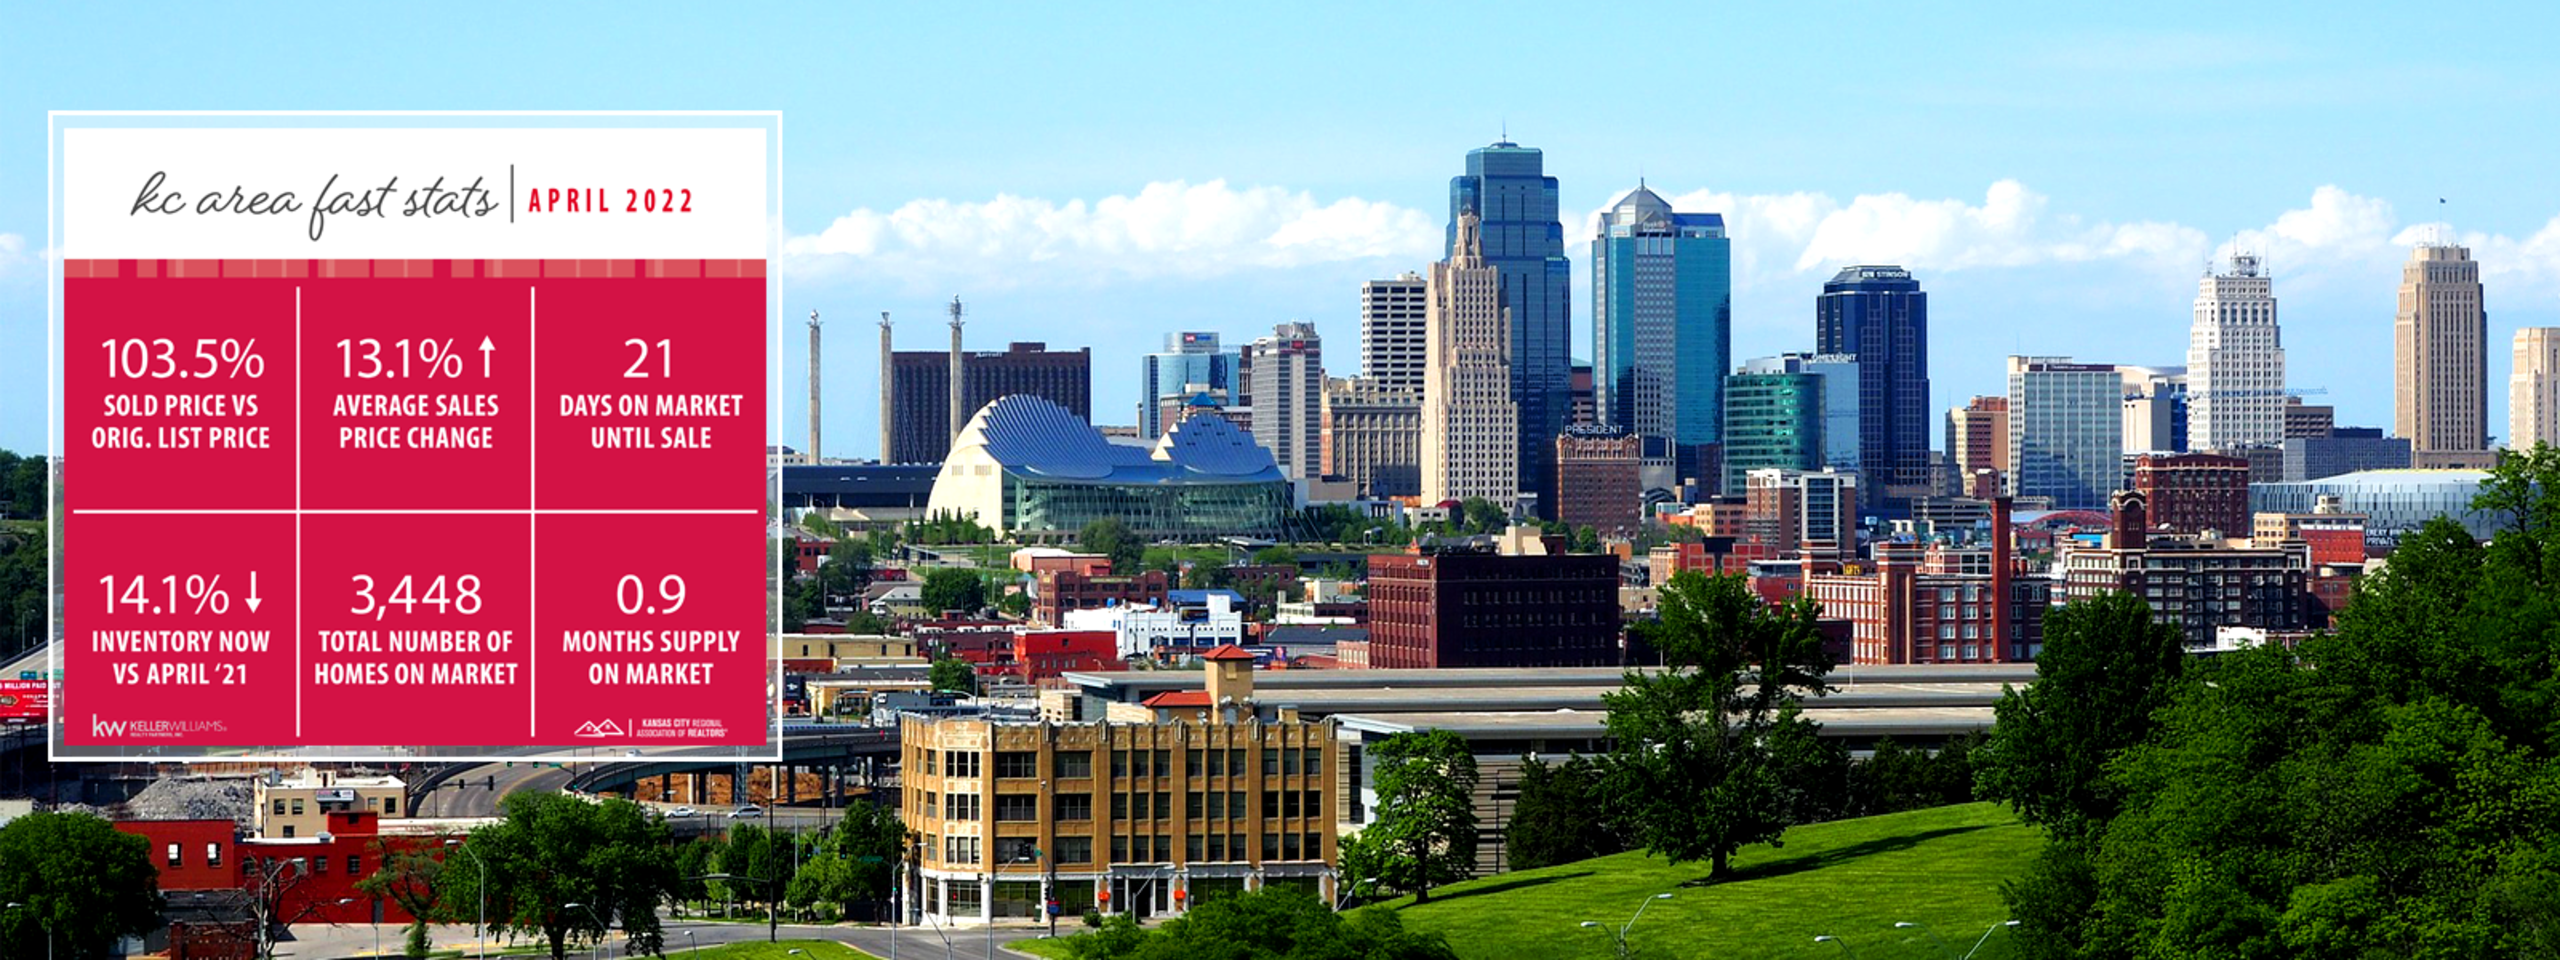 Visit our blog for KC area real estate & homeowner tips {{ CLICK HERE }}